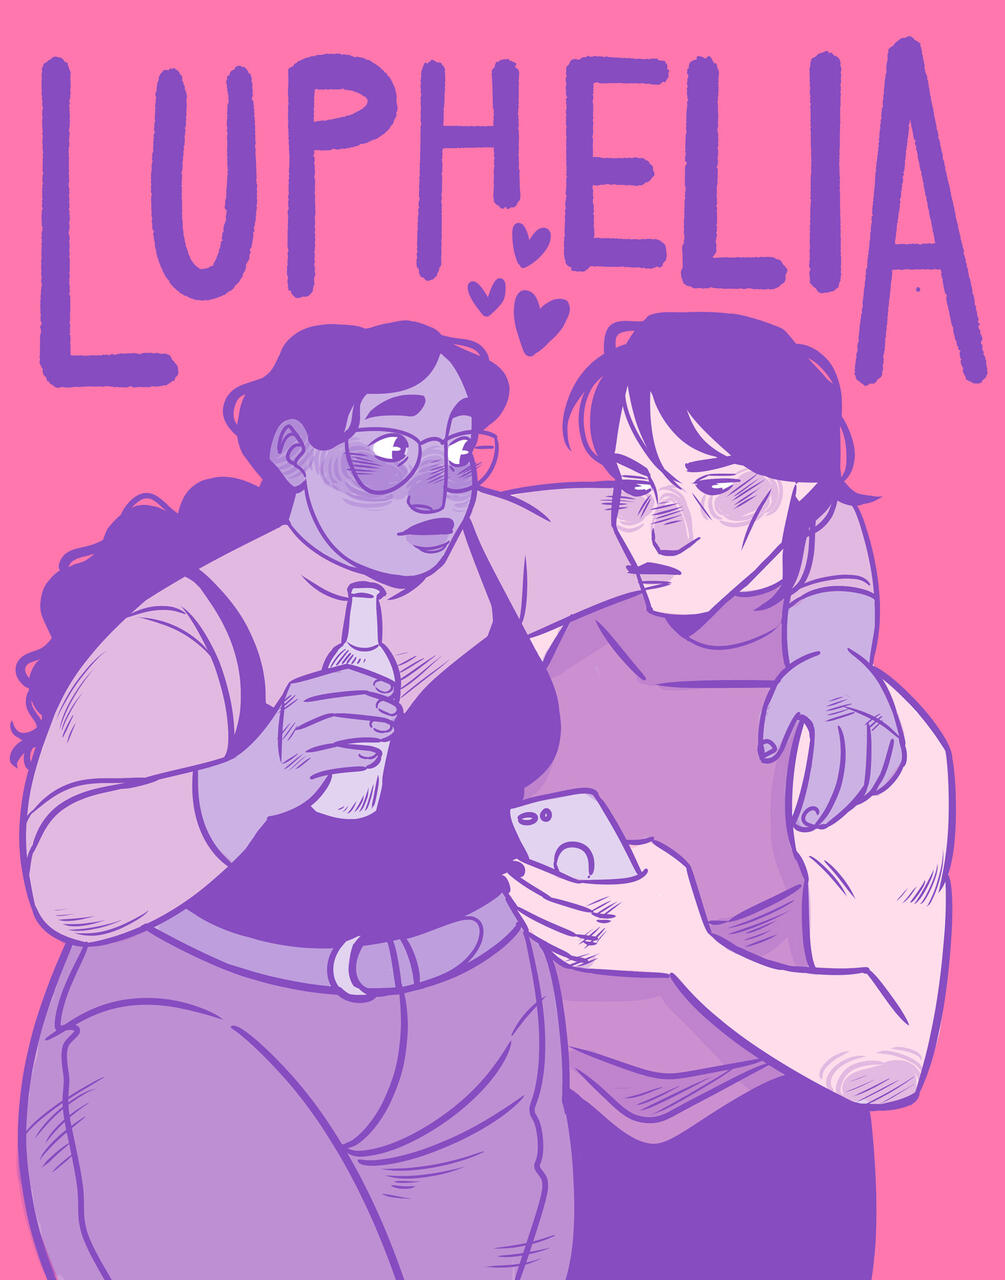 Luphelia, an illustration of two people with their arms around each other